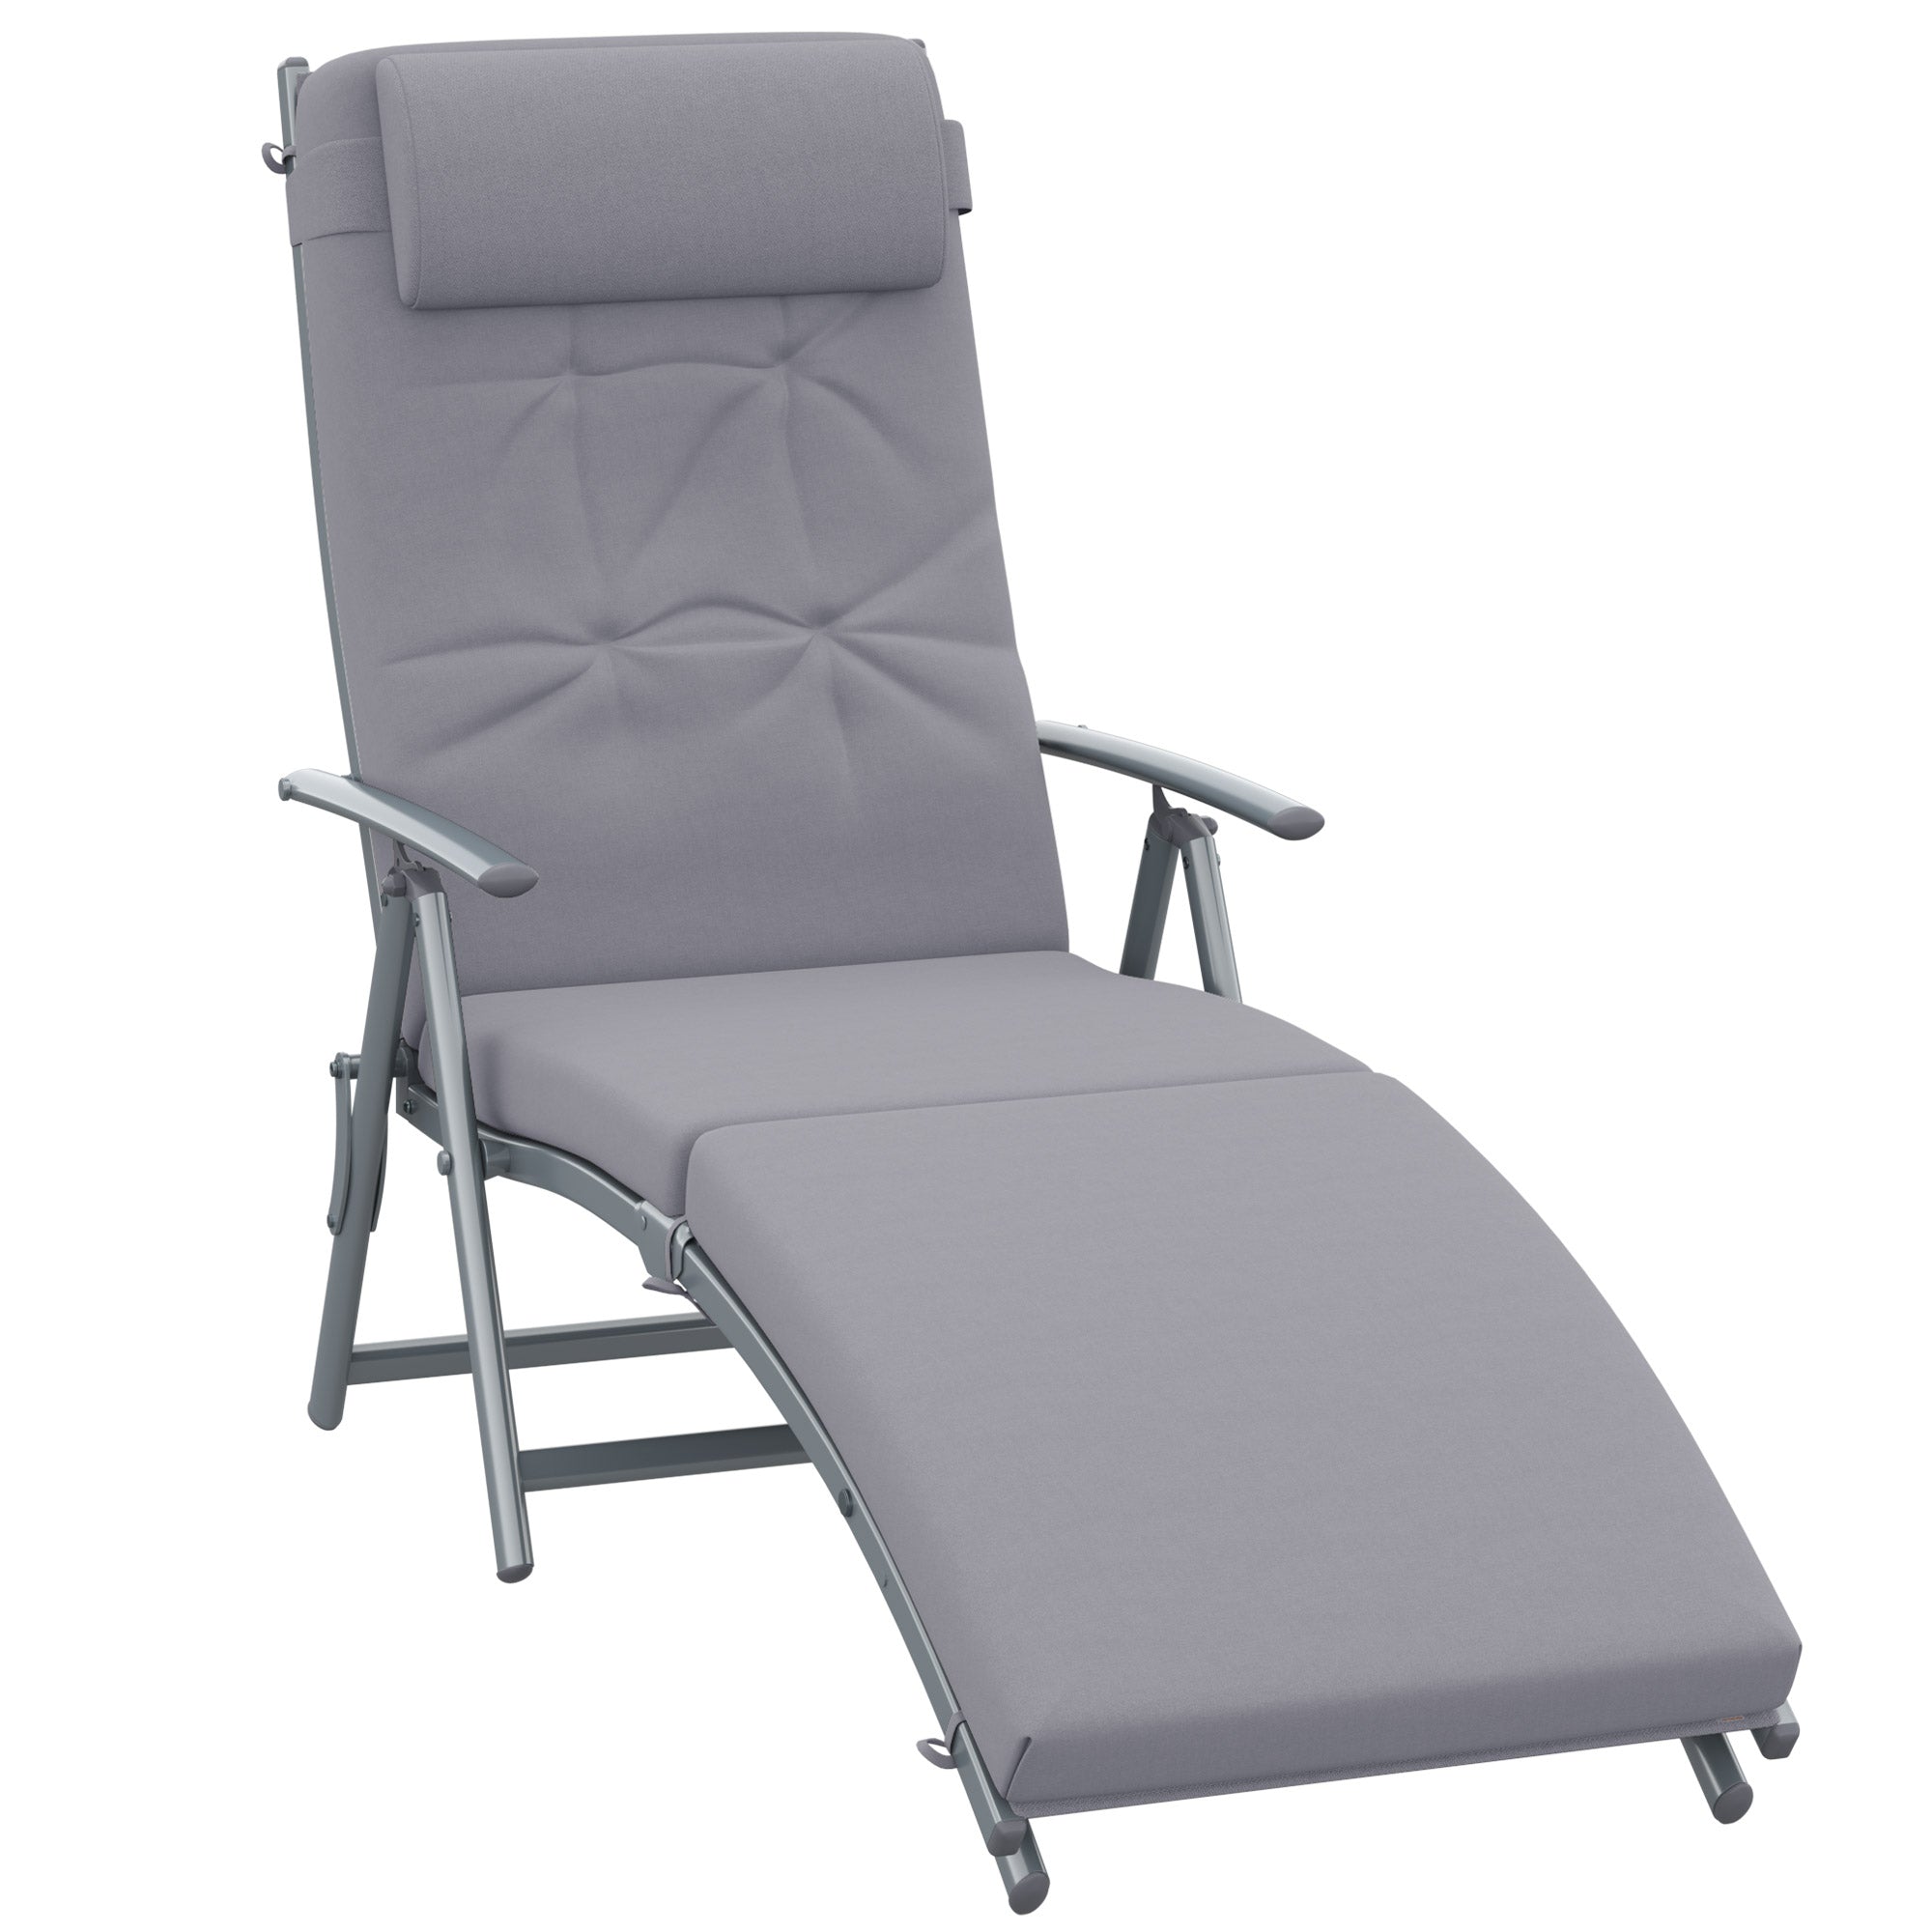 Outsunny Sun Lounger Recliner Foldable Padded Seat Adjustable Texteline Grey  | TJ Hughes